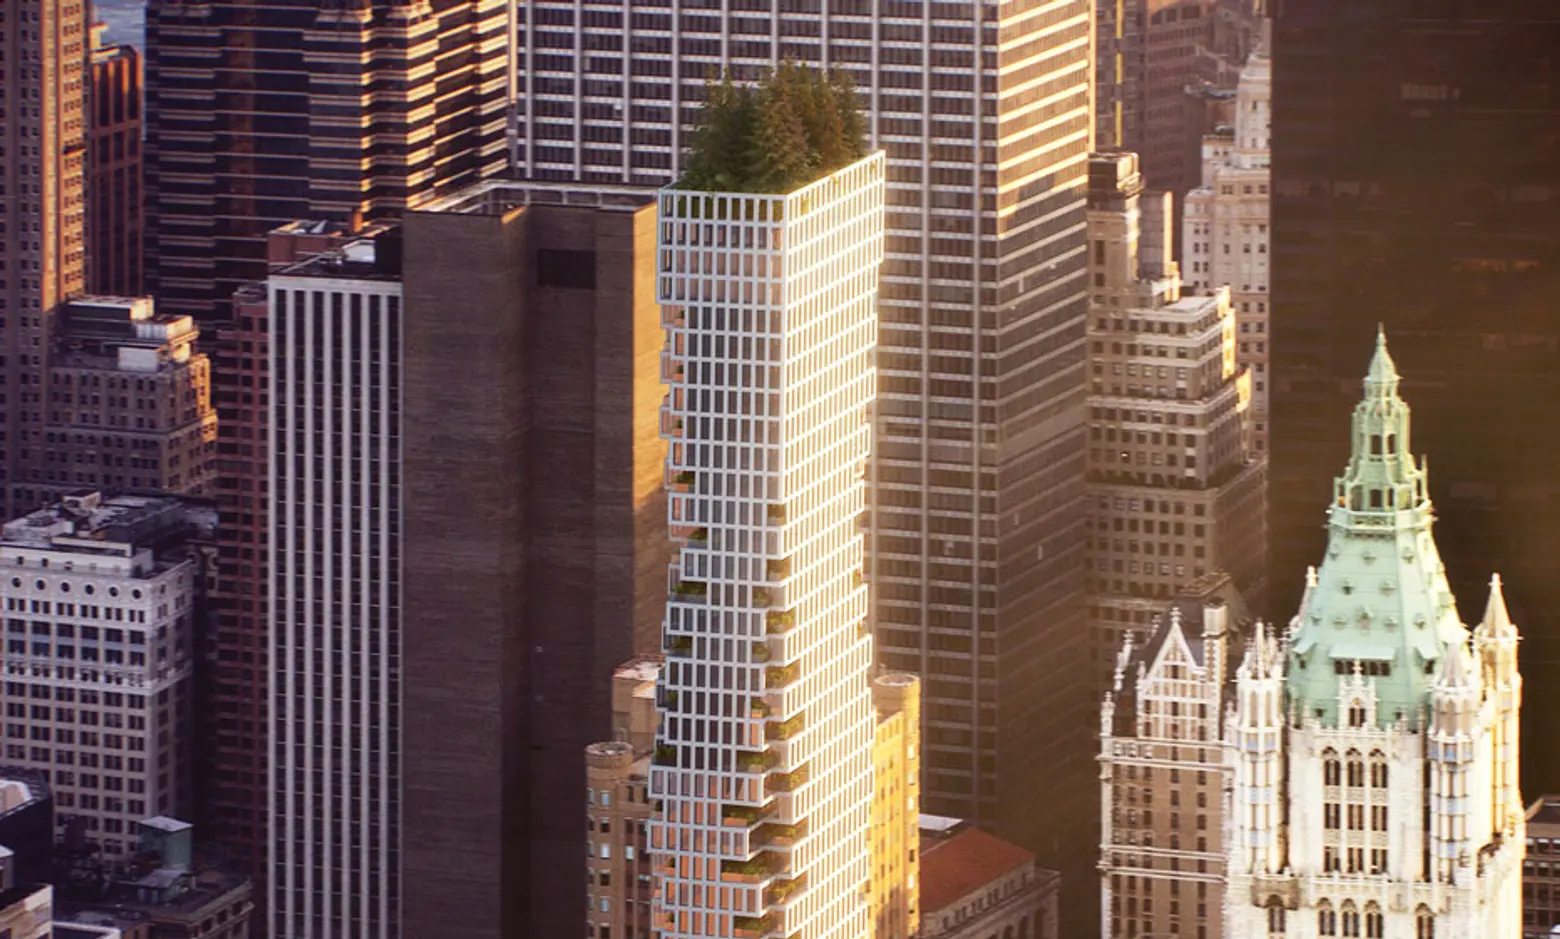 A Closer Look at ODA’s 75 Nassau Street & Other Nearby Towers Planned For Fulton Street